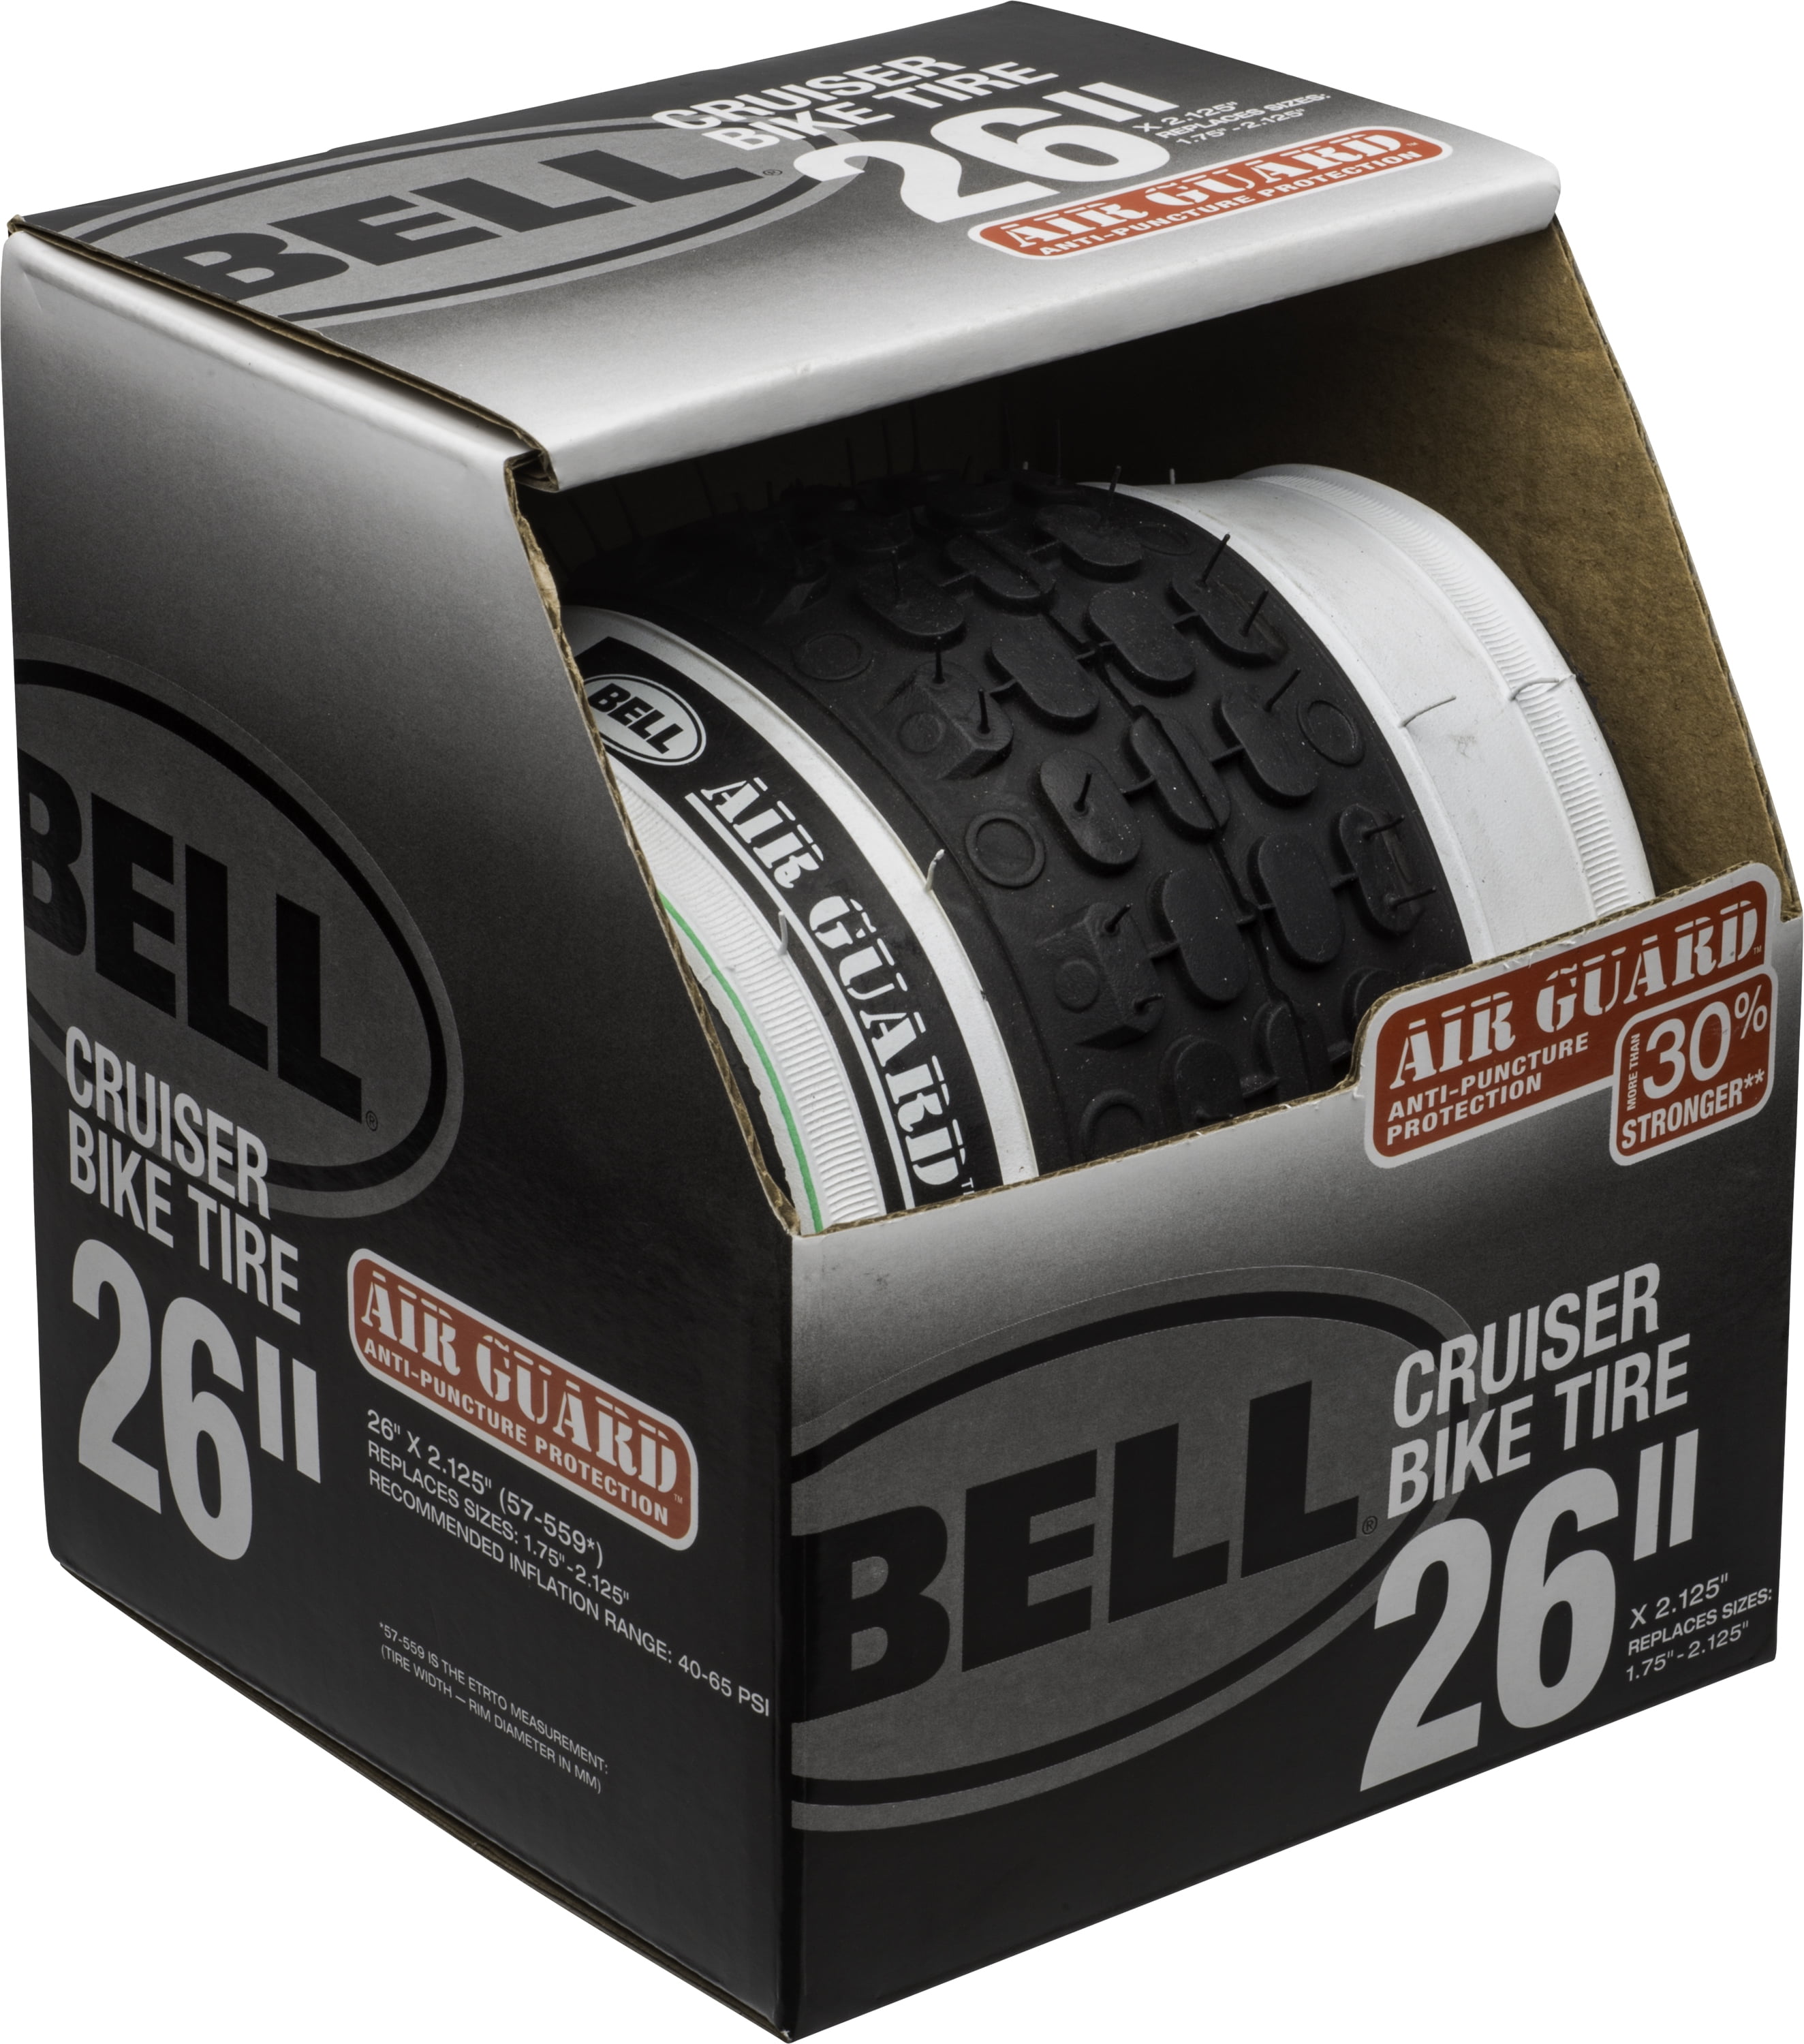 Bell Air Guard 29/" Mountain Bike Tires for sale online